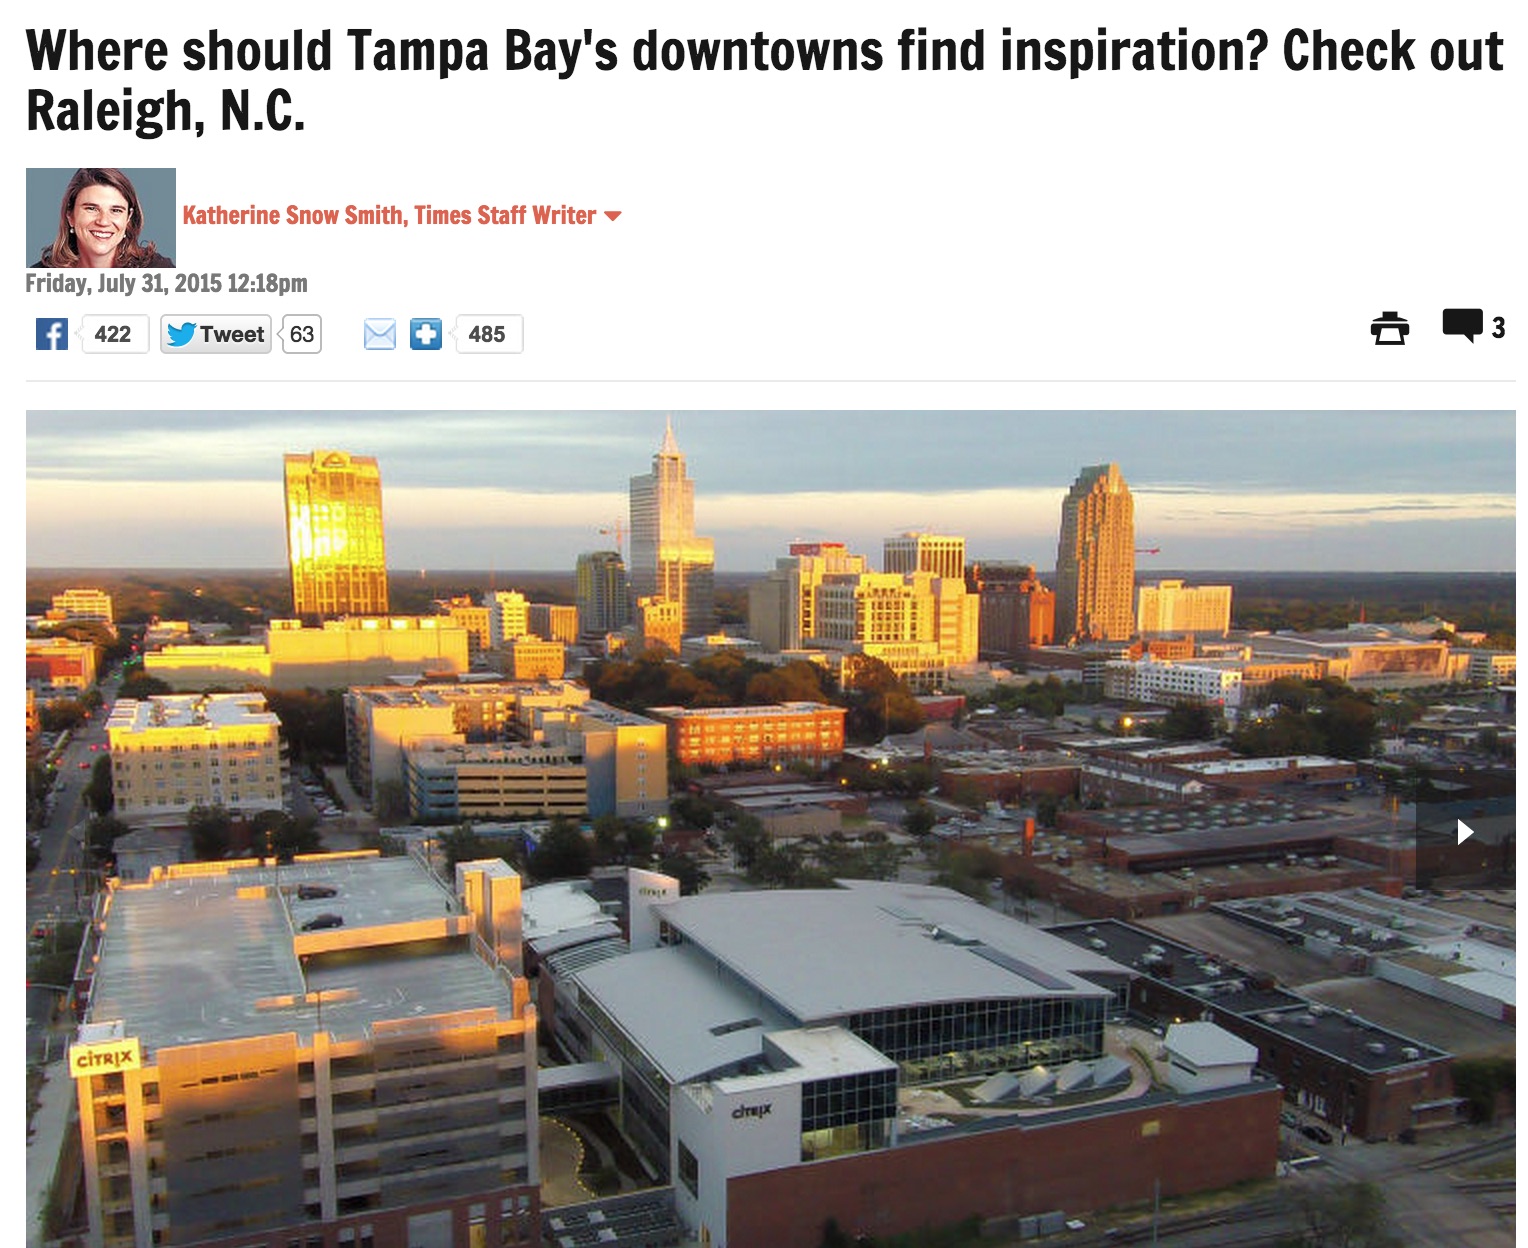 Tampa Bay finds inspiration in Raleigh, NC